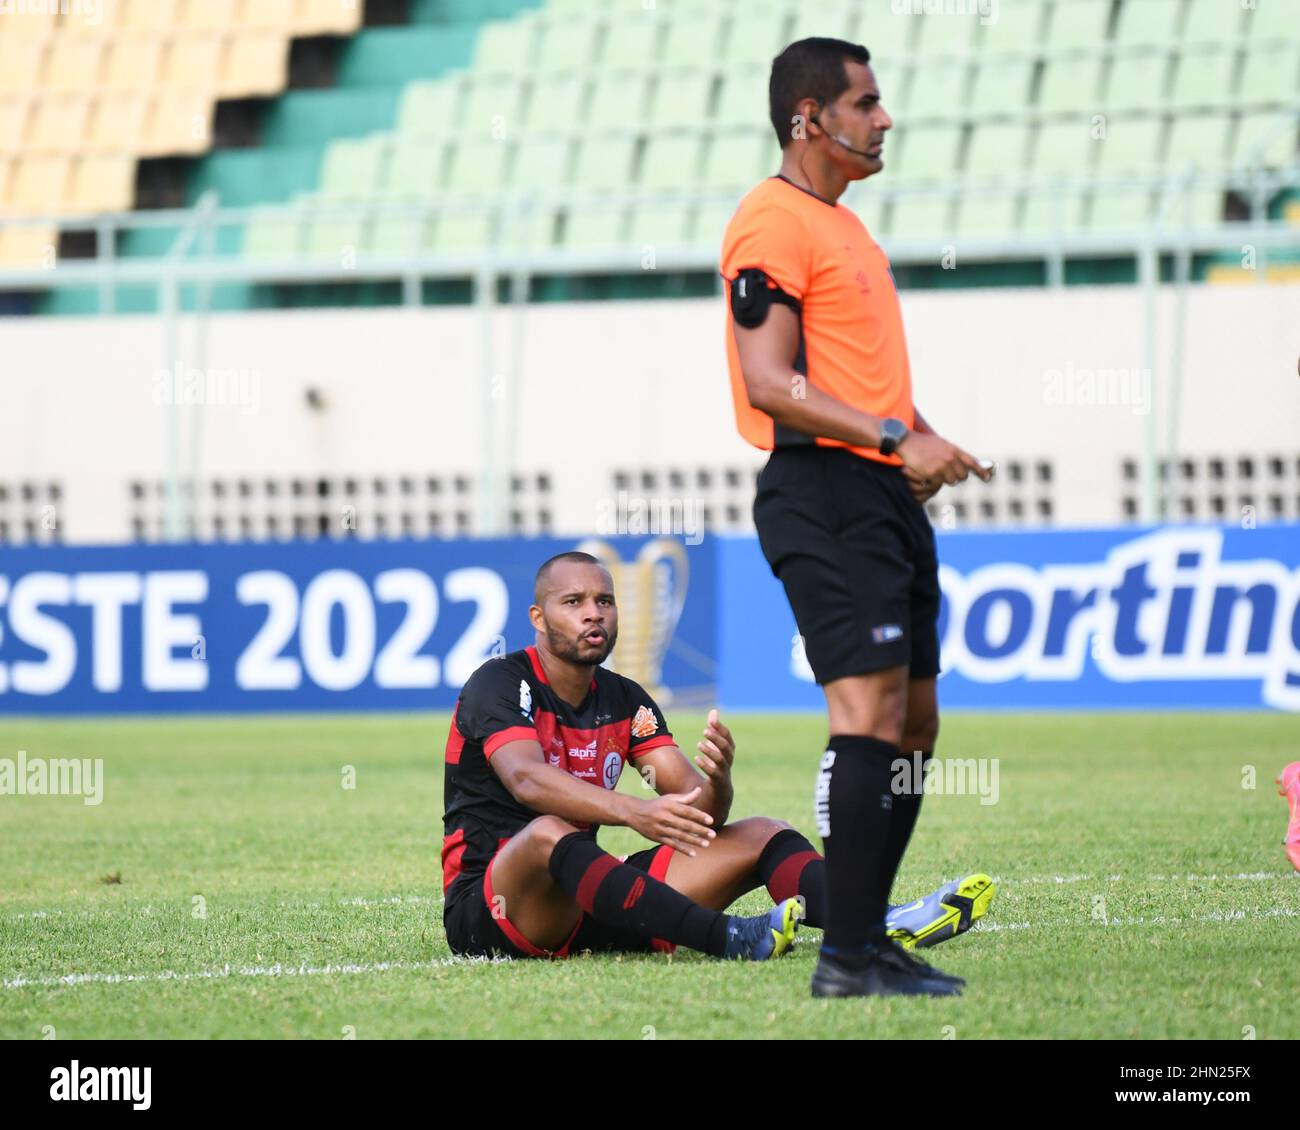 Fortaleza, Brazil. 13th Feb, 2022. CE - Fortaleza - 02/13/2022 - 2022 NORTHEAST CUP, FLORESTA X CAMPINENSE - Campinense player Olavio complains to the referee during a match against Floresta at the Arena Castelao stadium for the Northeast Cup 2022 championship. Photo: Kely Pereira/AGIF/Sipa USA Credit: Sipa USA/Alamy Live News Stock Photo